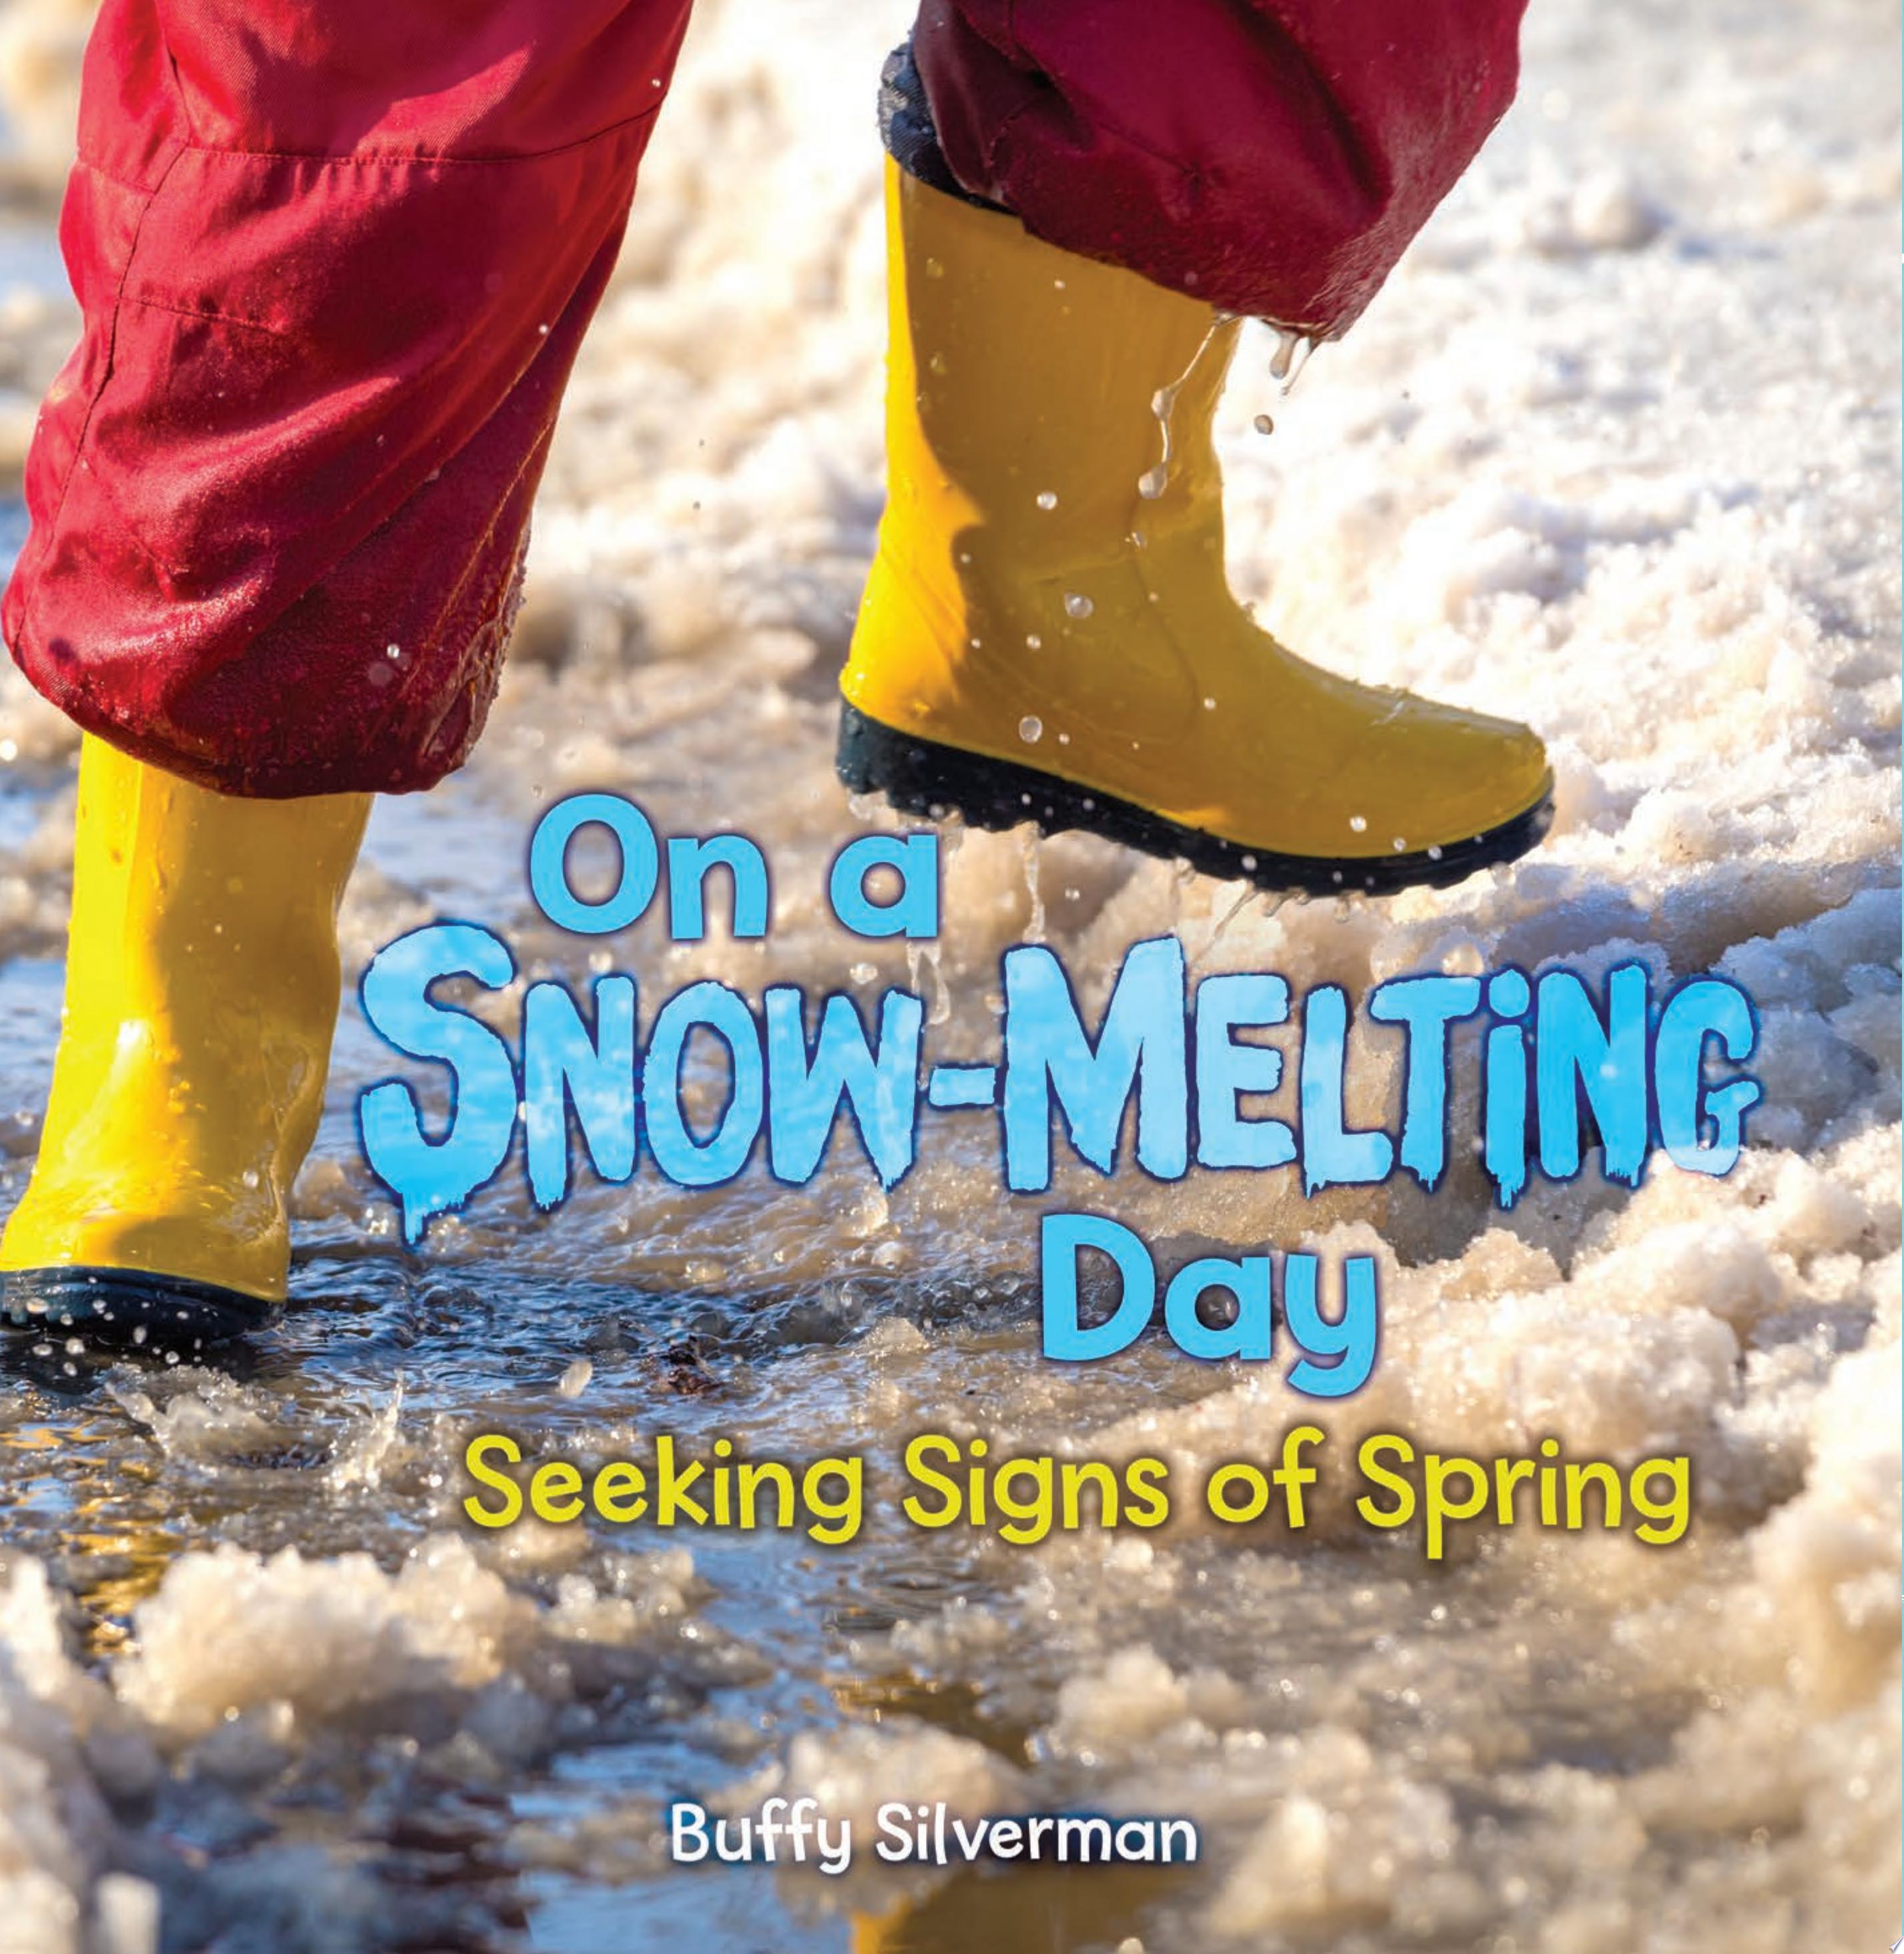 Image for "On a Snow-melting Day"